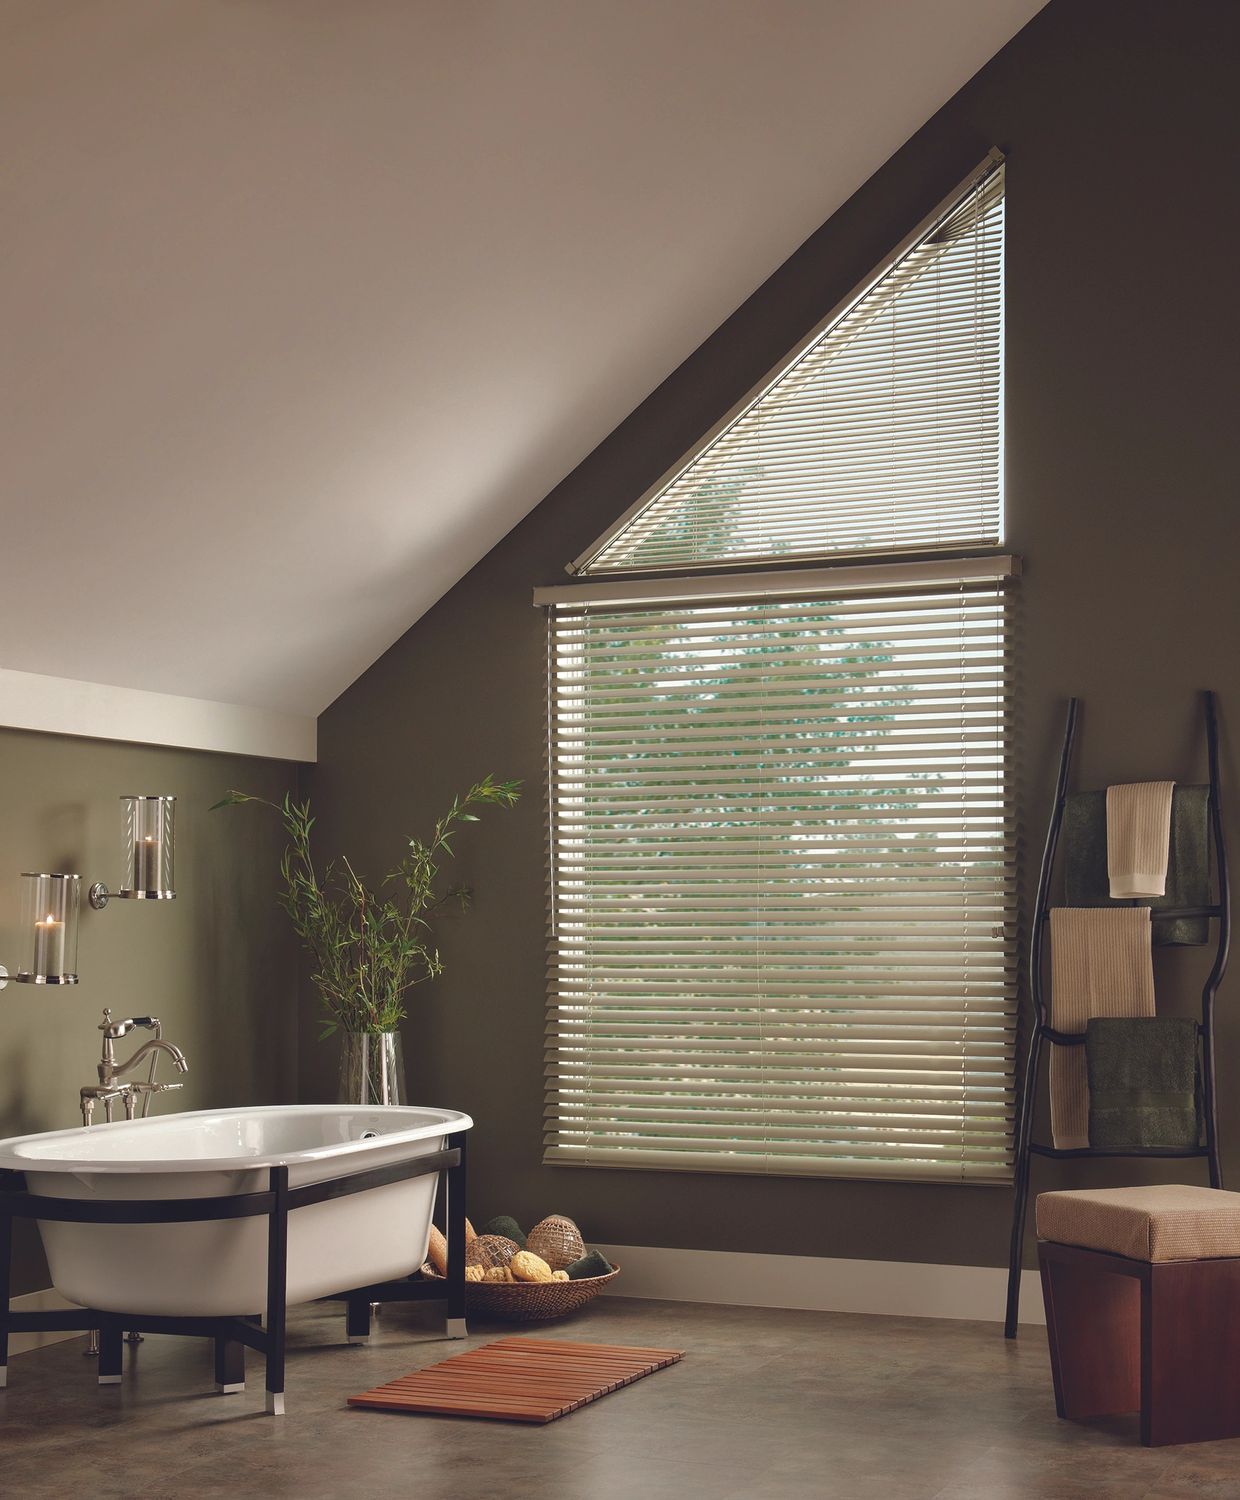 Blinds expertly installed in the angled window of a bathroom